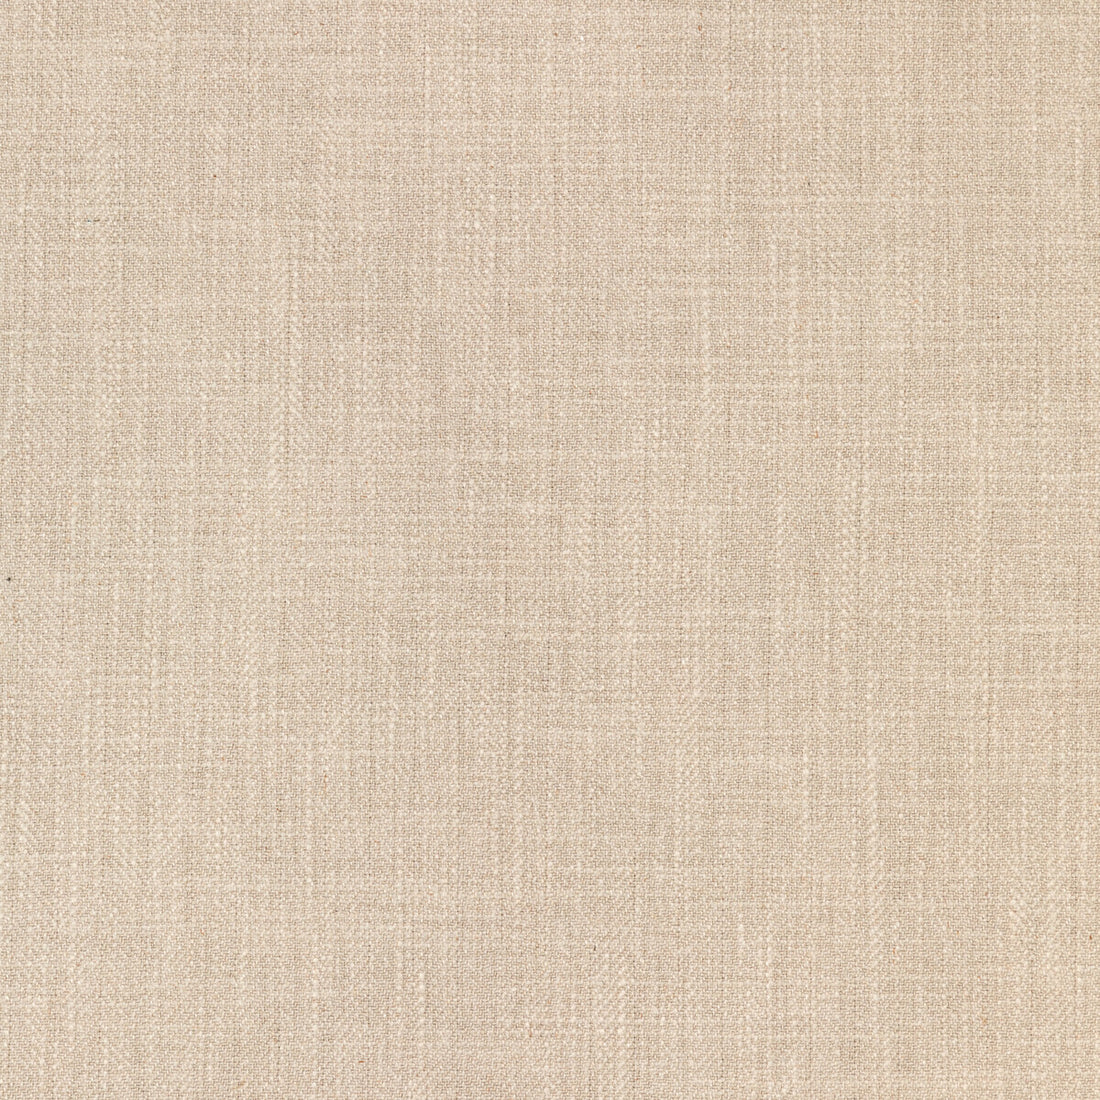 Kravet Basics fabric in 33842-1601 color - pattern 33842.1601.0 - by Kravet Basics in the Perfect Plains collection